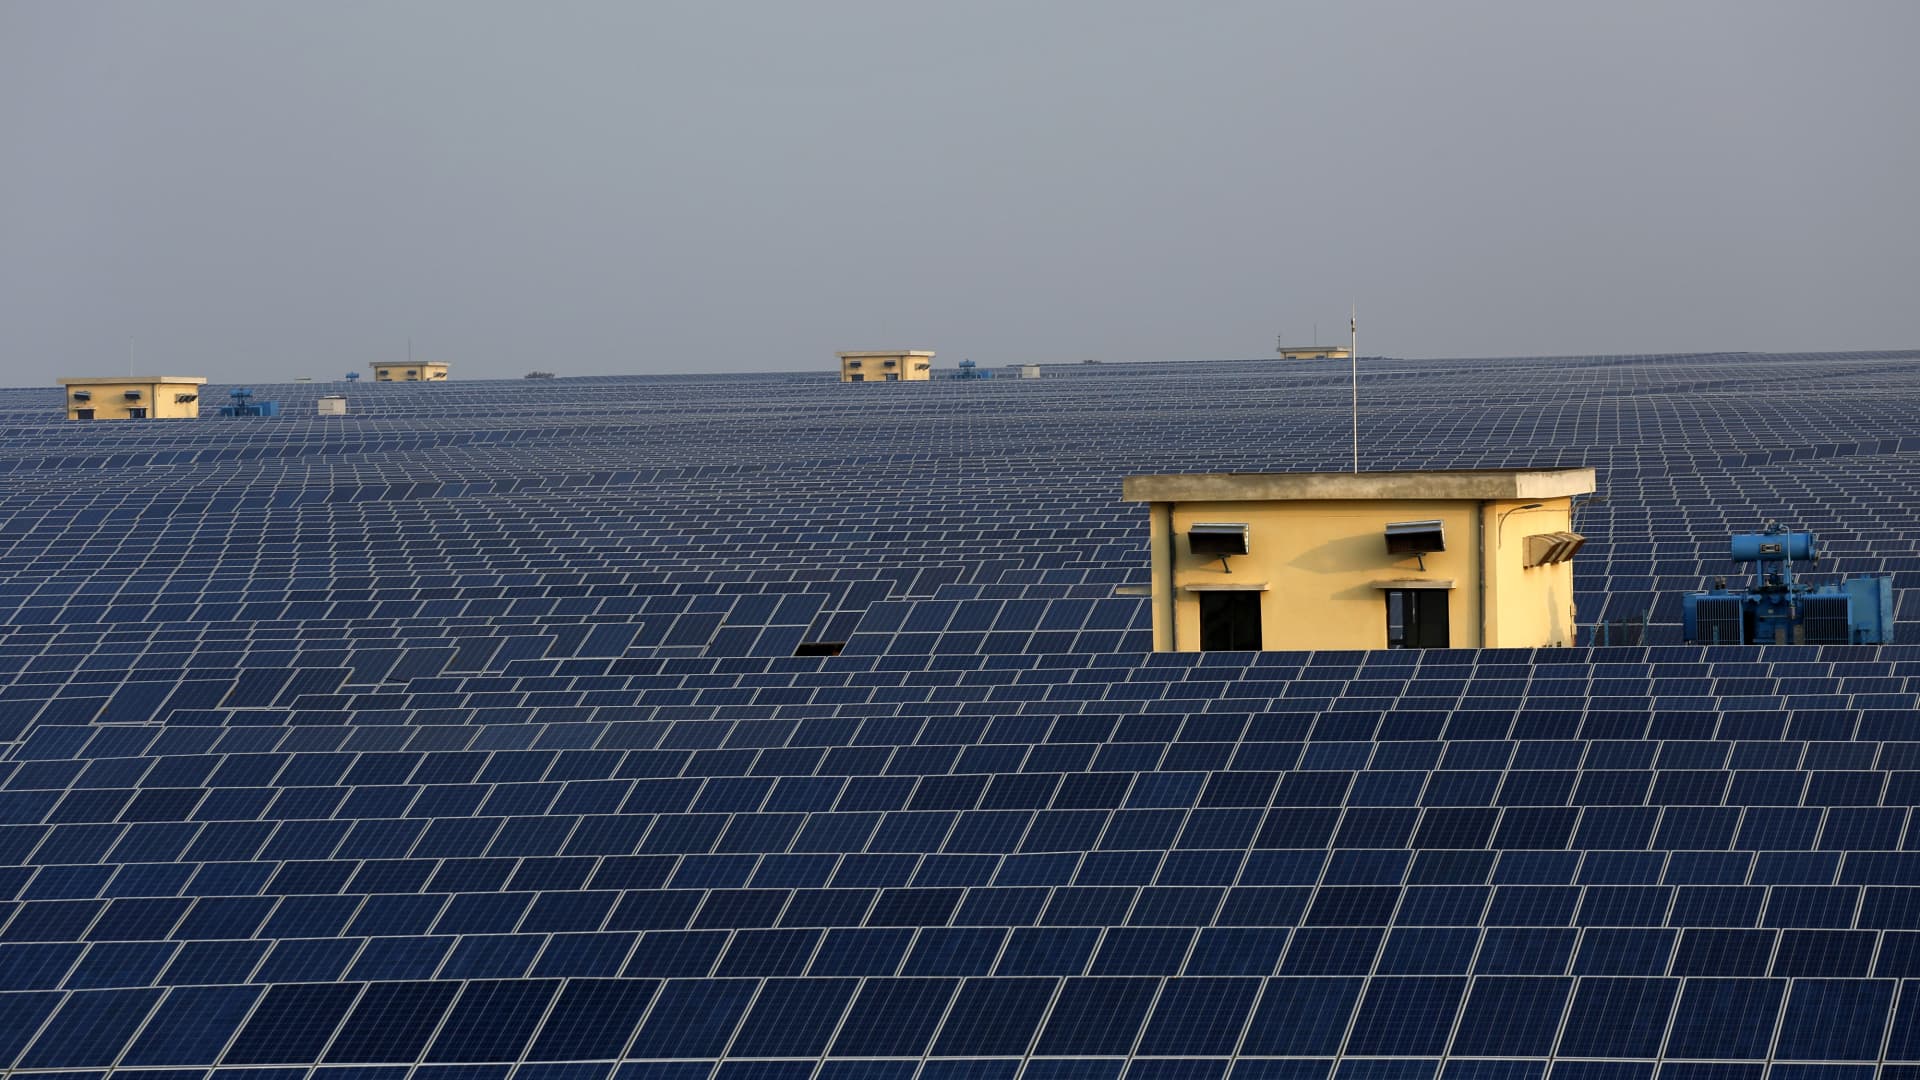 CNBC’s Inside India newsletter: A $270 billion gamble on green?